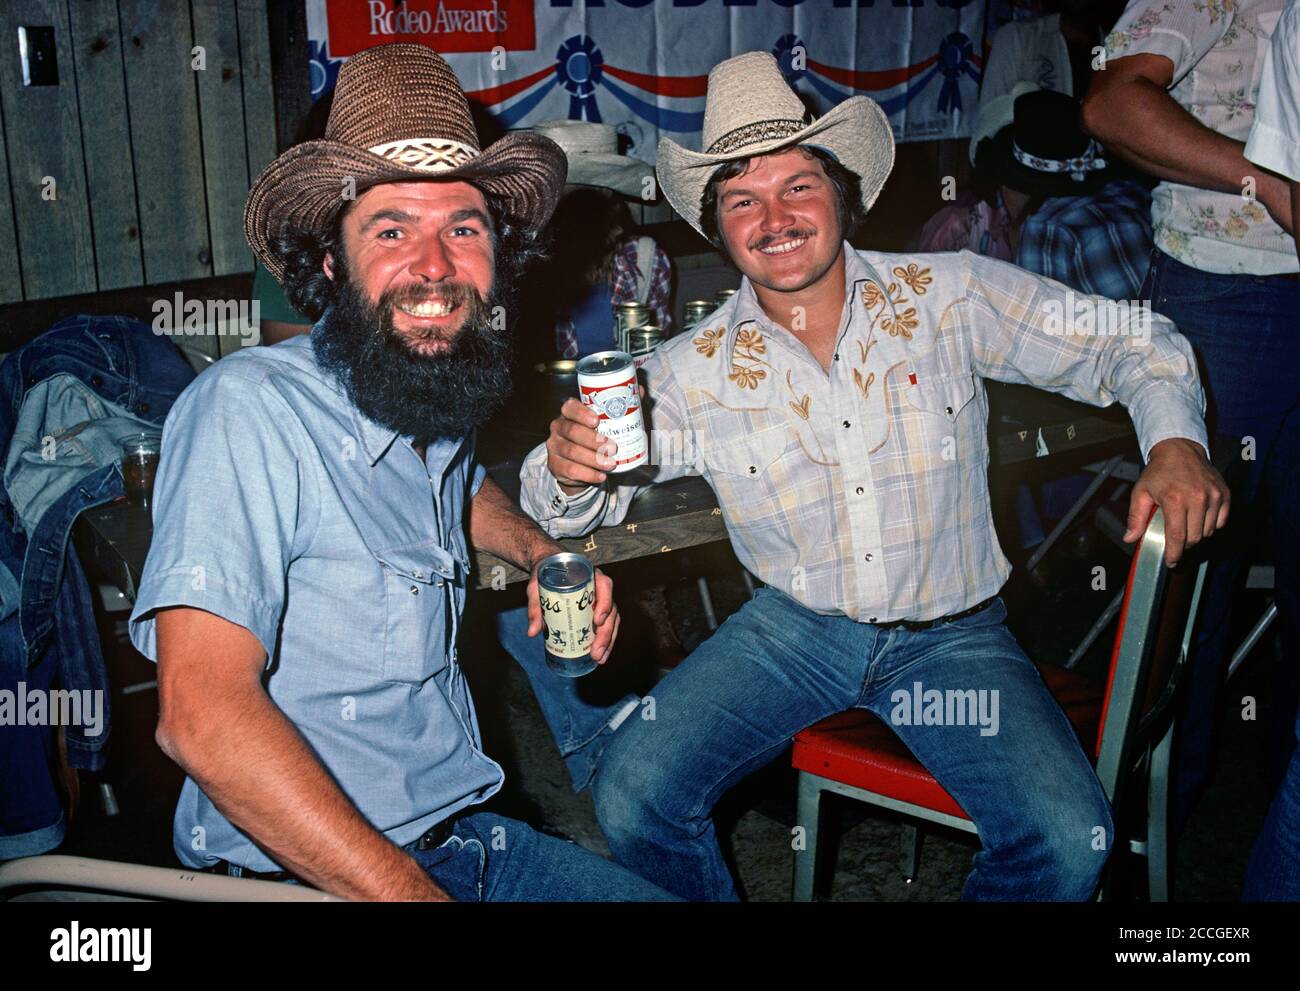 CHEYENNE COWBOYS DRINKING CANS OF BEER ON NIGHT OUT, WYOMING, USA 1970s Stock Photo